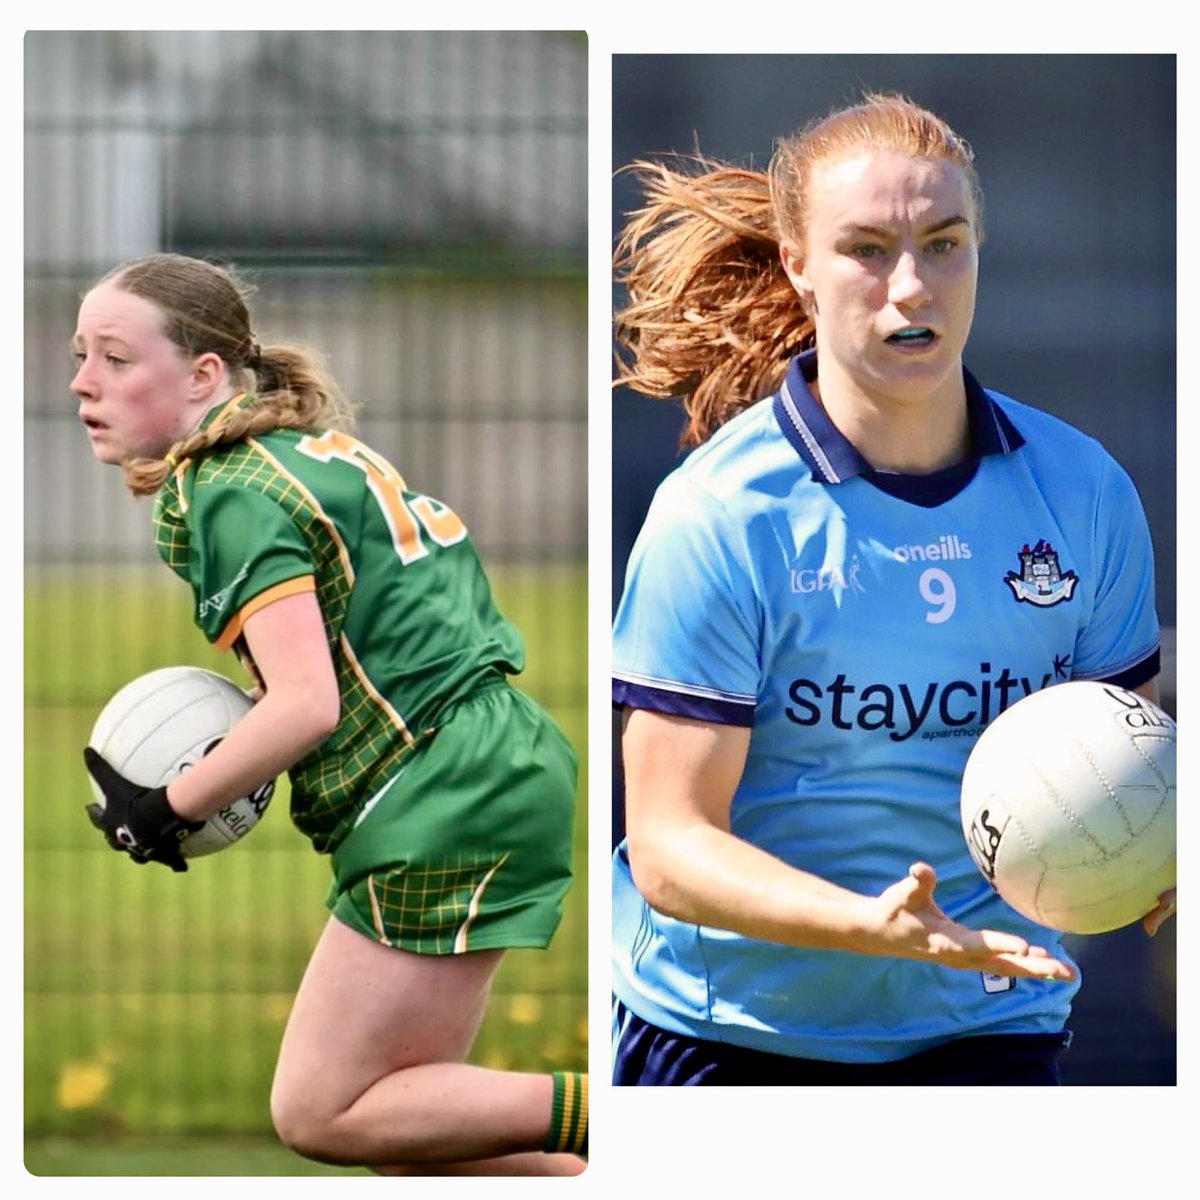 The very best of luck to my beautiful daughters ❤️ Neasa playing for Meath u14’s in the All Ireland Q/F v Derry today & @Lauren_MageeR in the Leinster Snr Final v Meath tomorrow. #ProudDad #GaaFamily ❤️